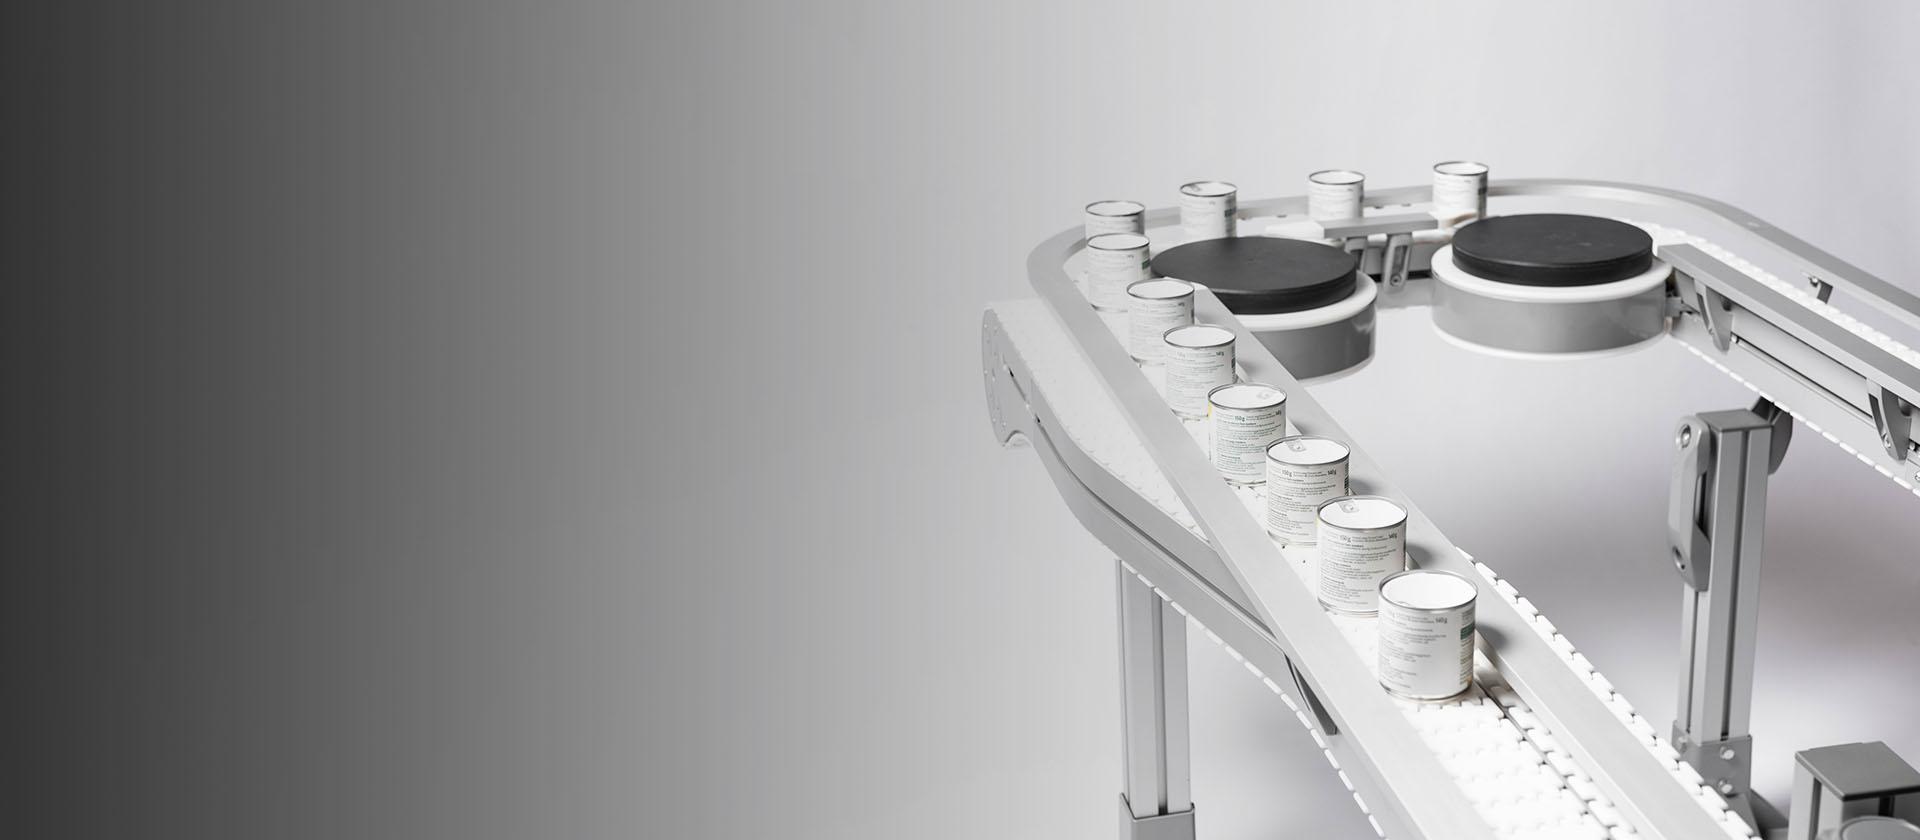 Plastic chain conveyors with a modular approach